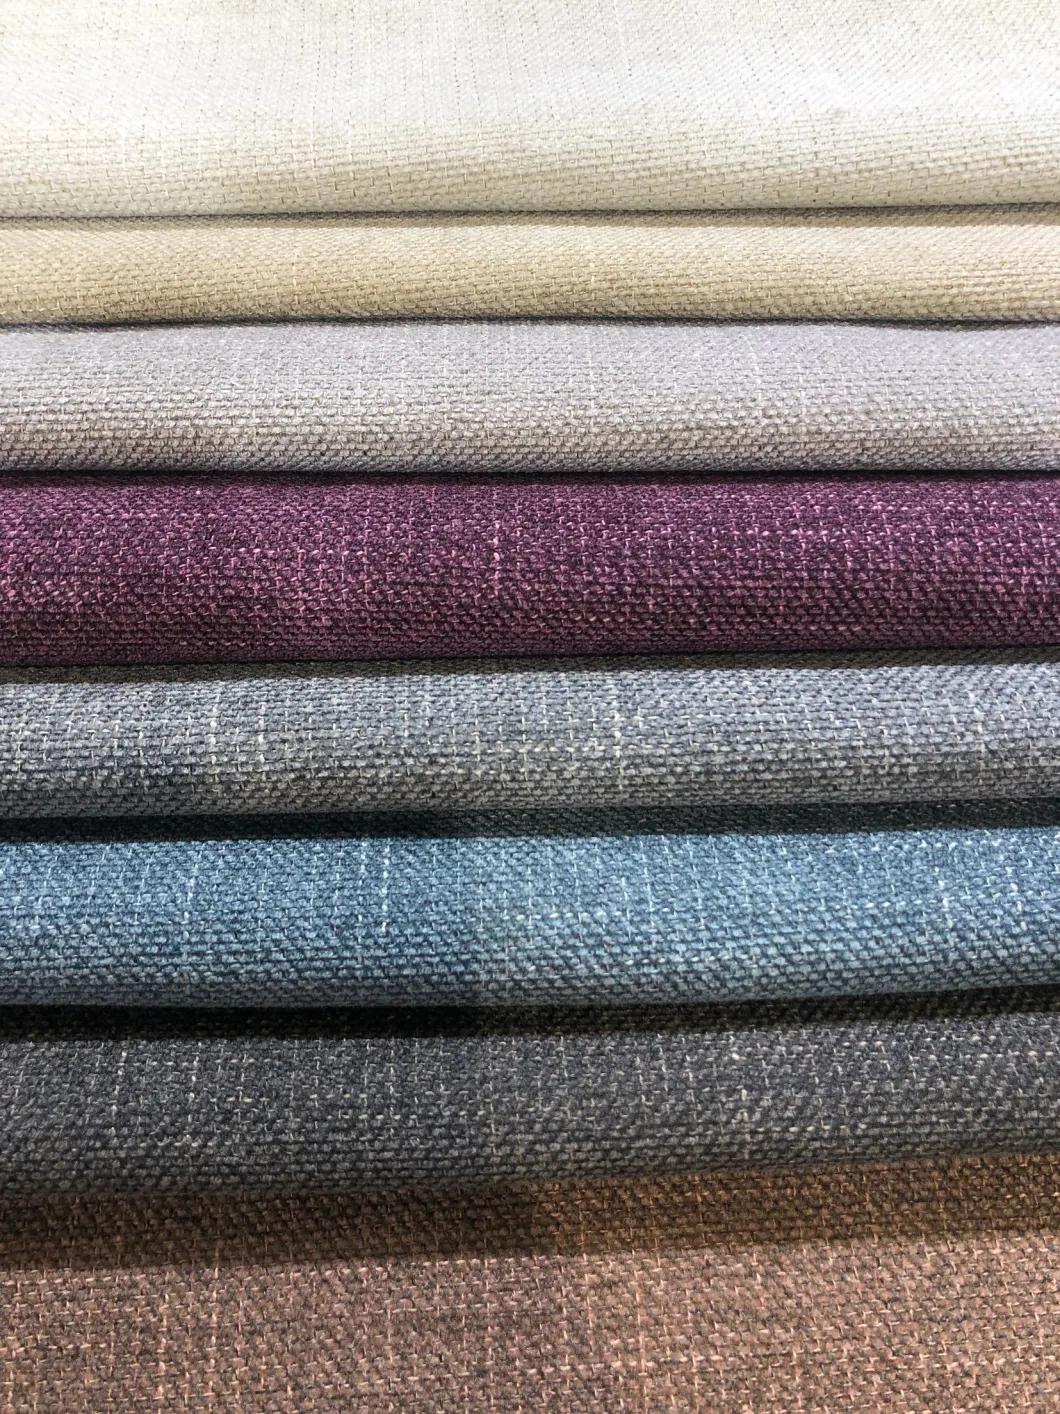 100%Polyester Chenille Fabric for Sofa and Furniture